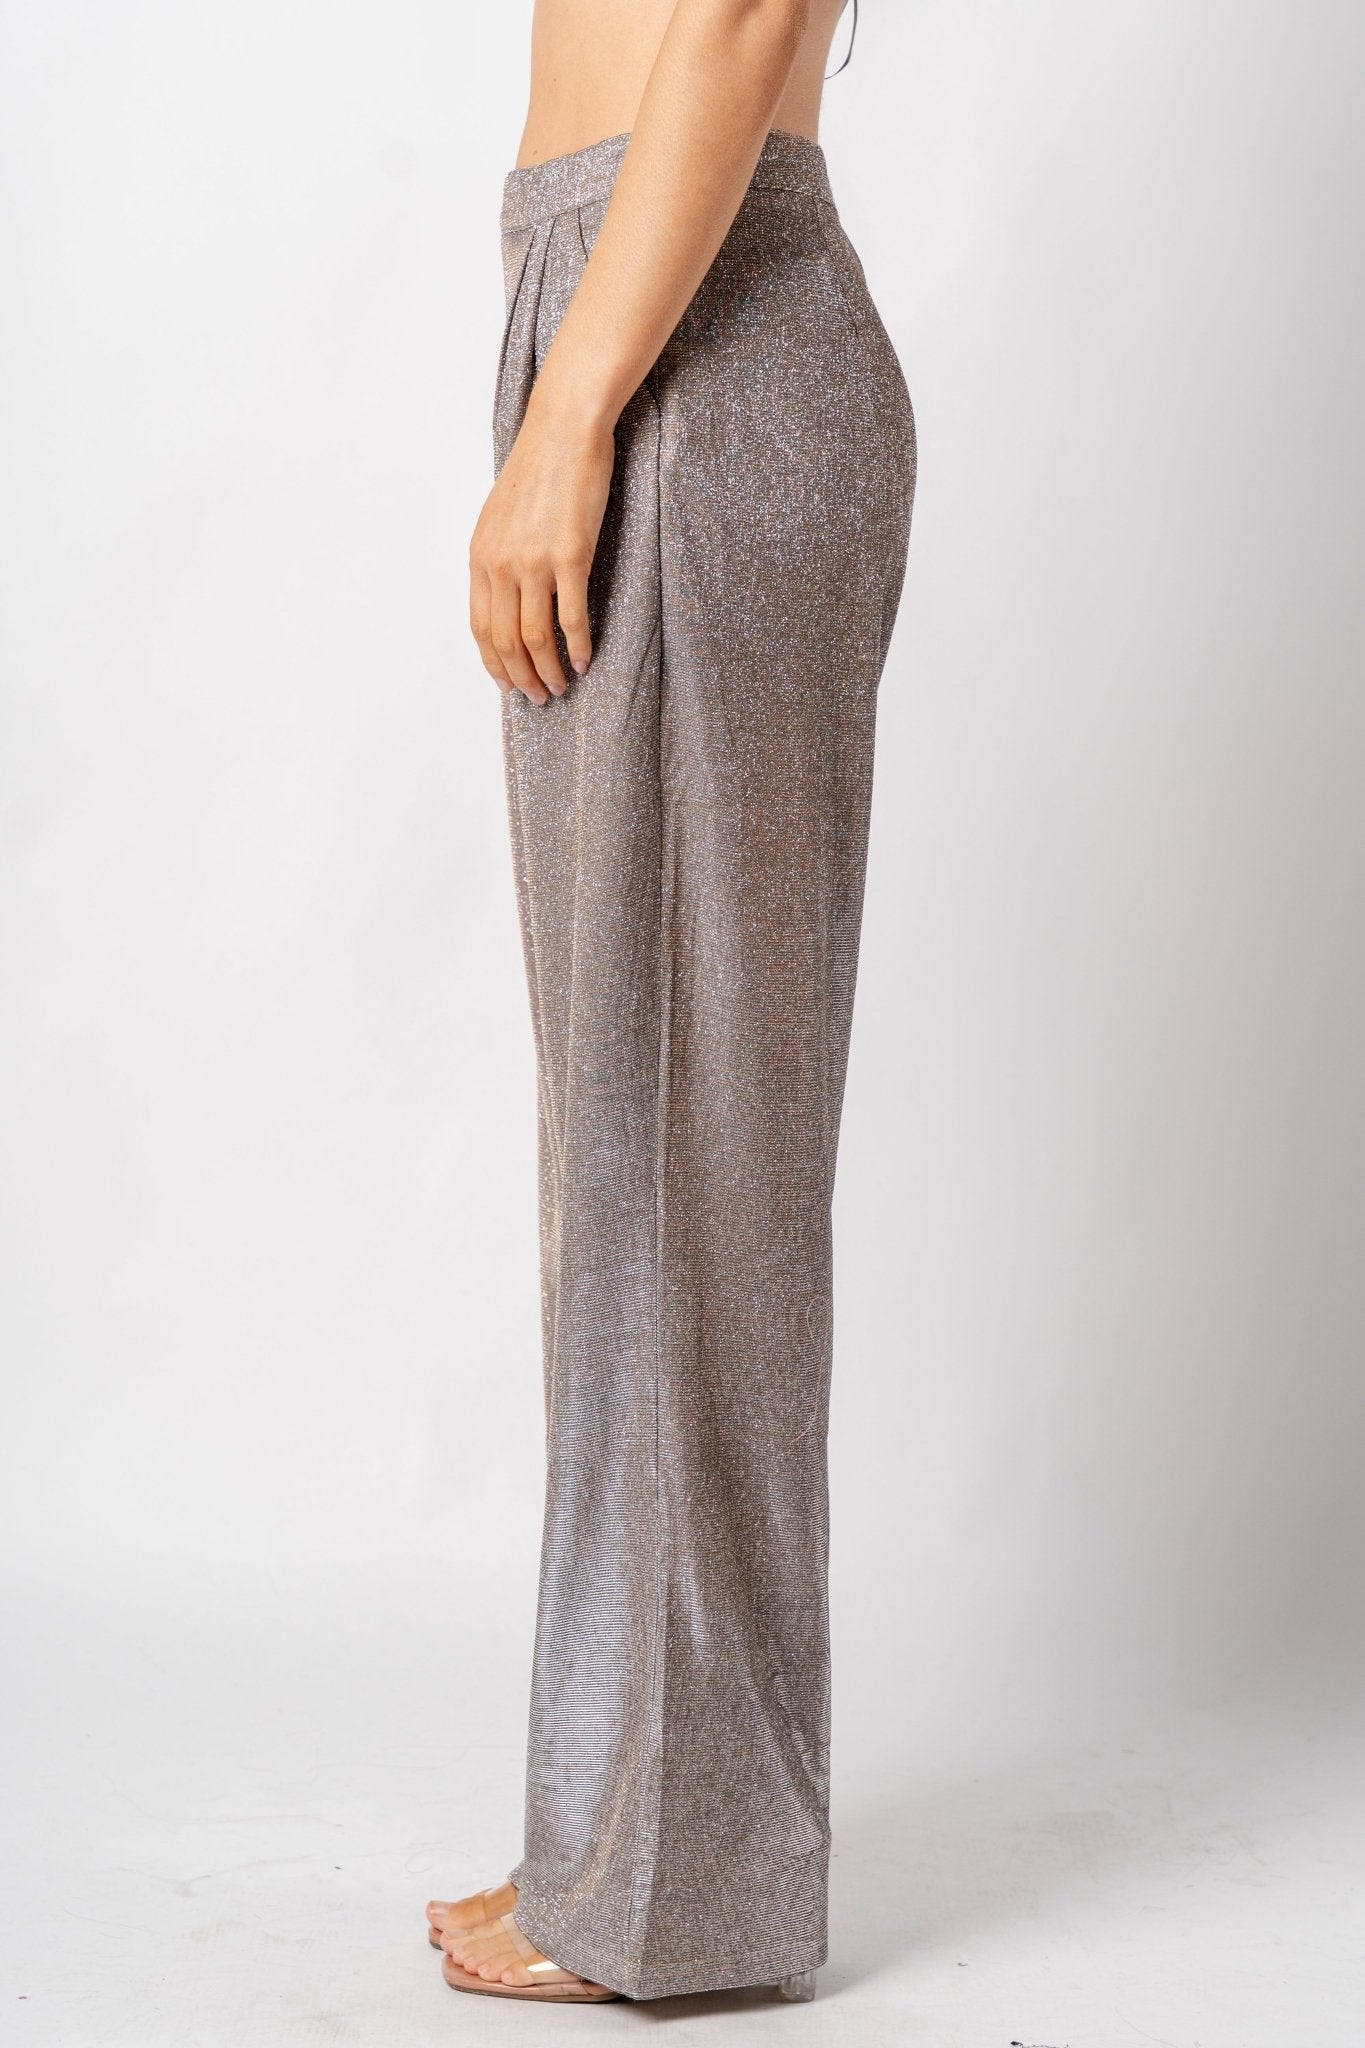 High waist glitter wide leg pants tan/silver - Trendy New Year's Eve Dresses, Skirts, Kimonos and Sequins at Lush Fashion Lounge Boutique in Oklahoma City